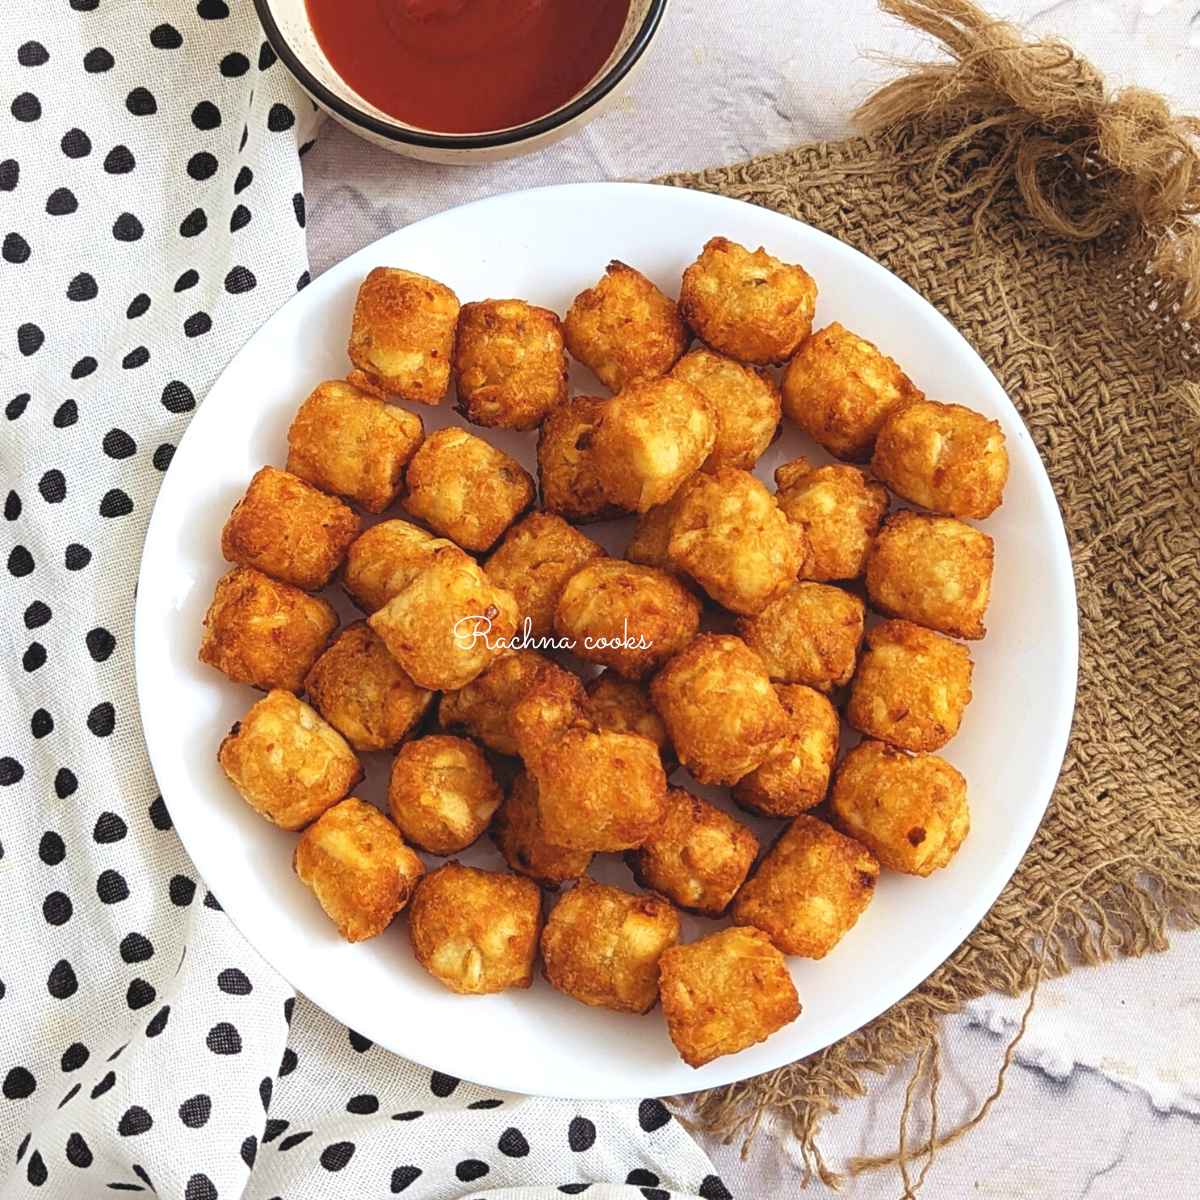 Golden tater tots served on a white plate.